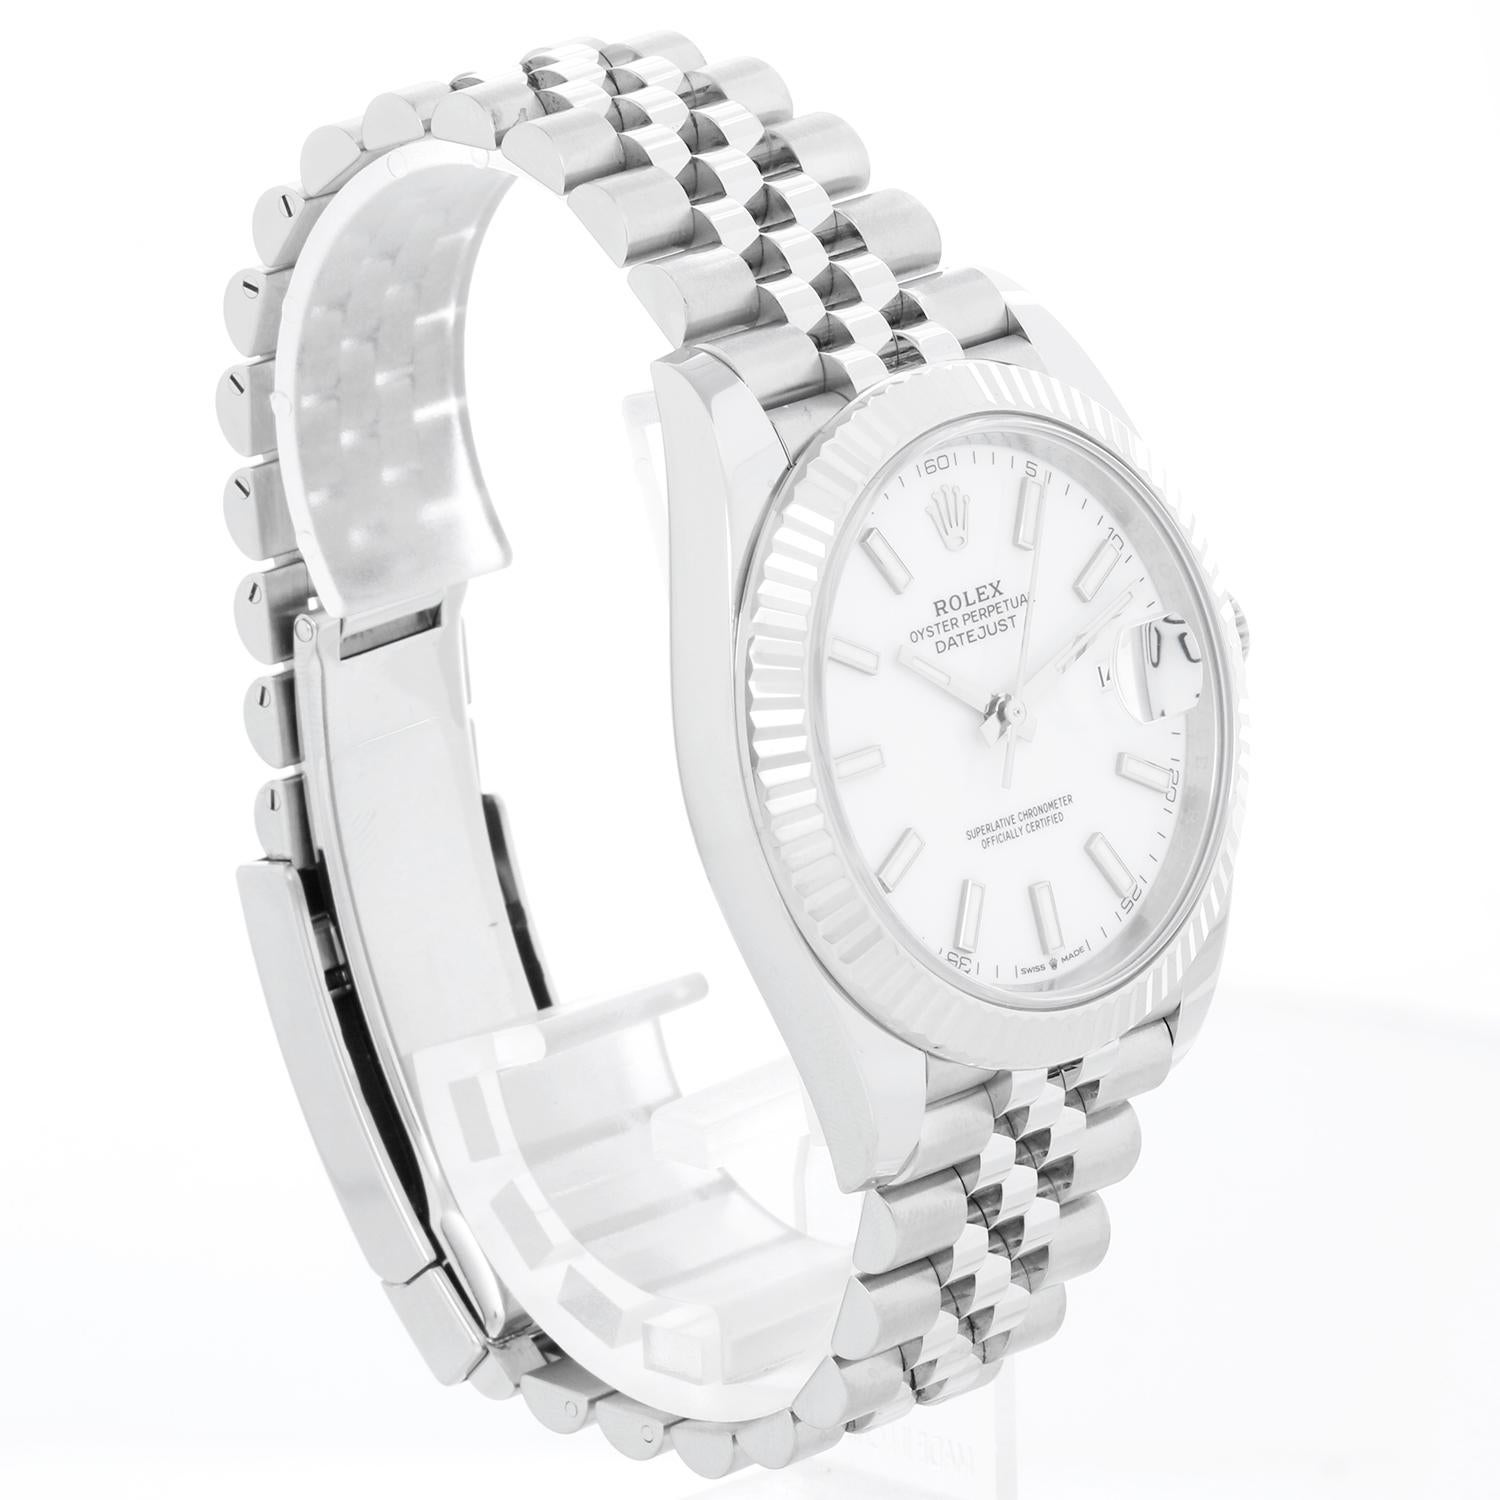 Rolex Datejust 41 Stainless Steel Men's White Dial Watch 126334 - Automatic winding, Quickset, sapphire crystal. Stainless steel case with 18k white gold fluted bezel  (41mm diameter). White dial with index markers. Stainless steel Jubilee bracelet.